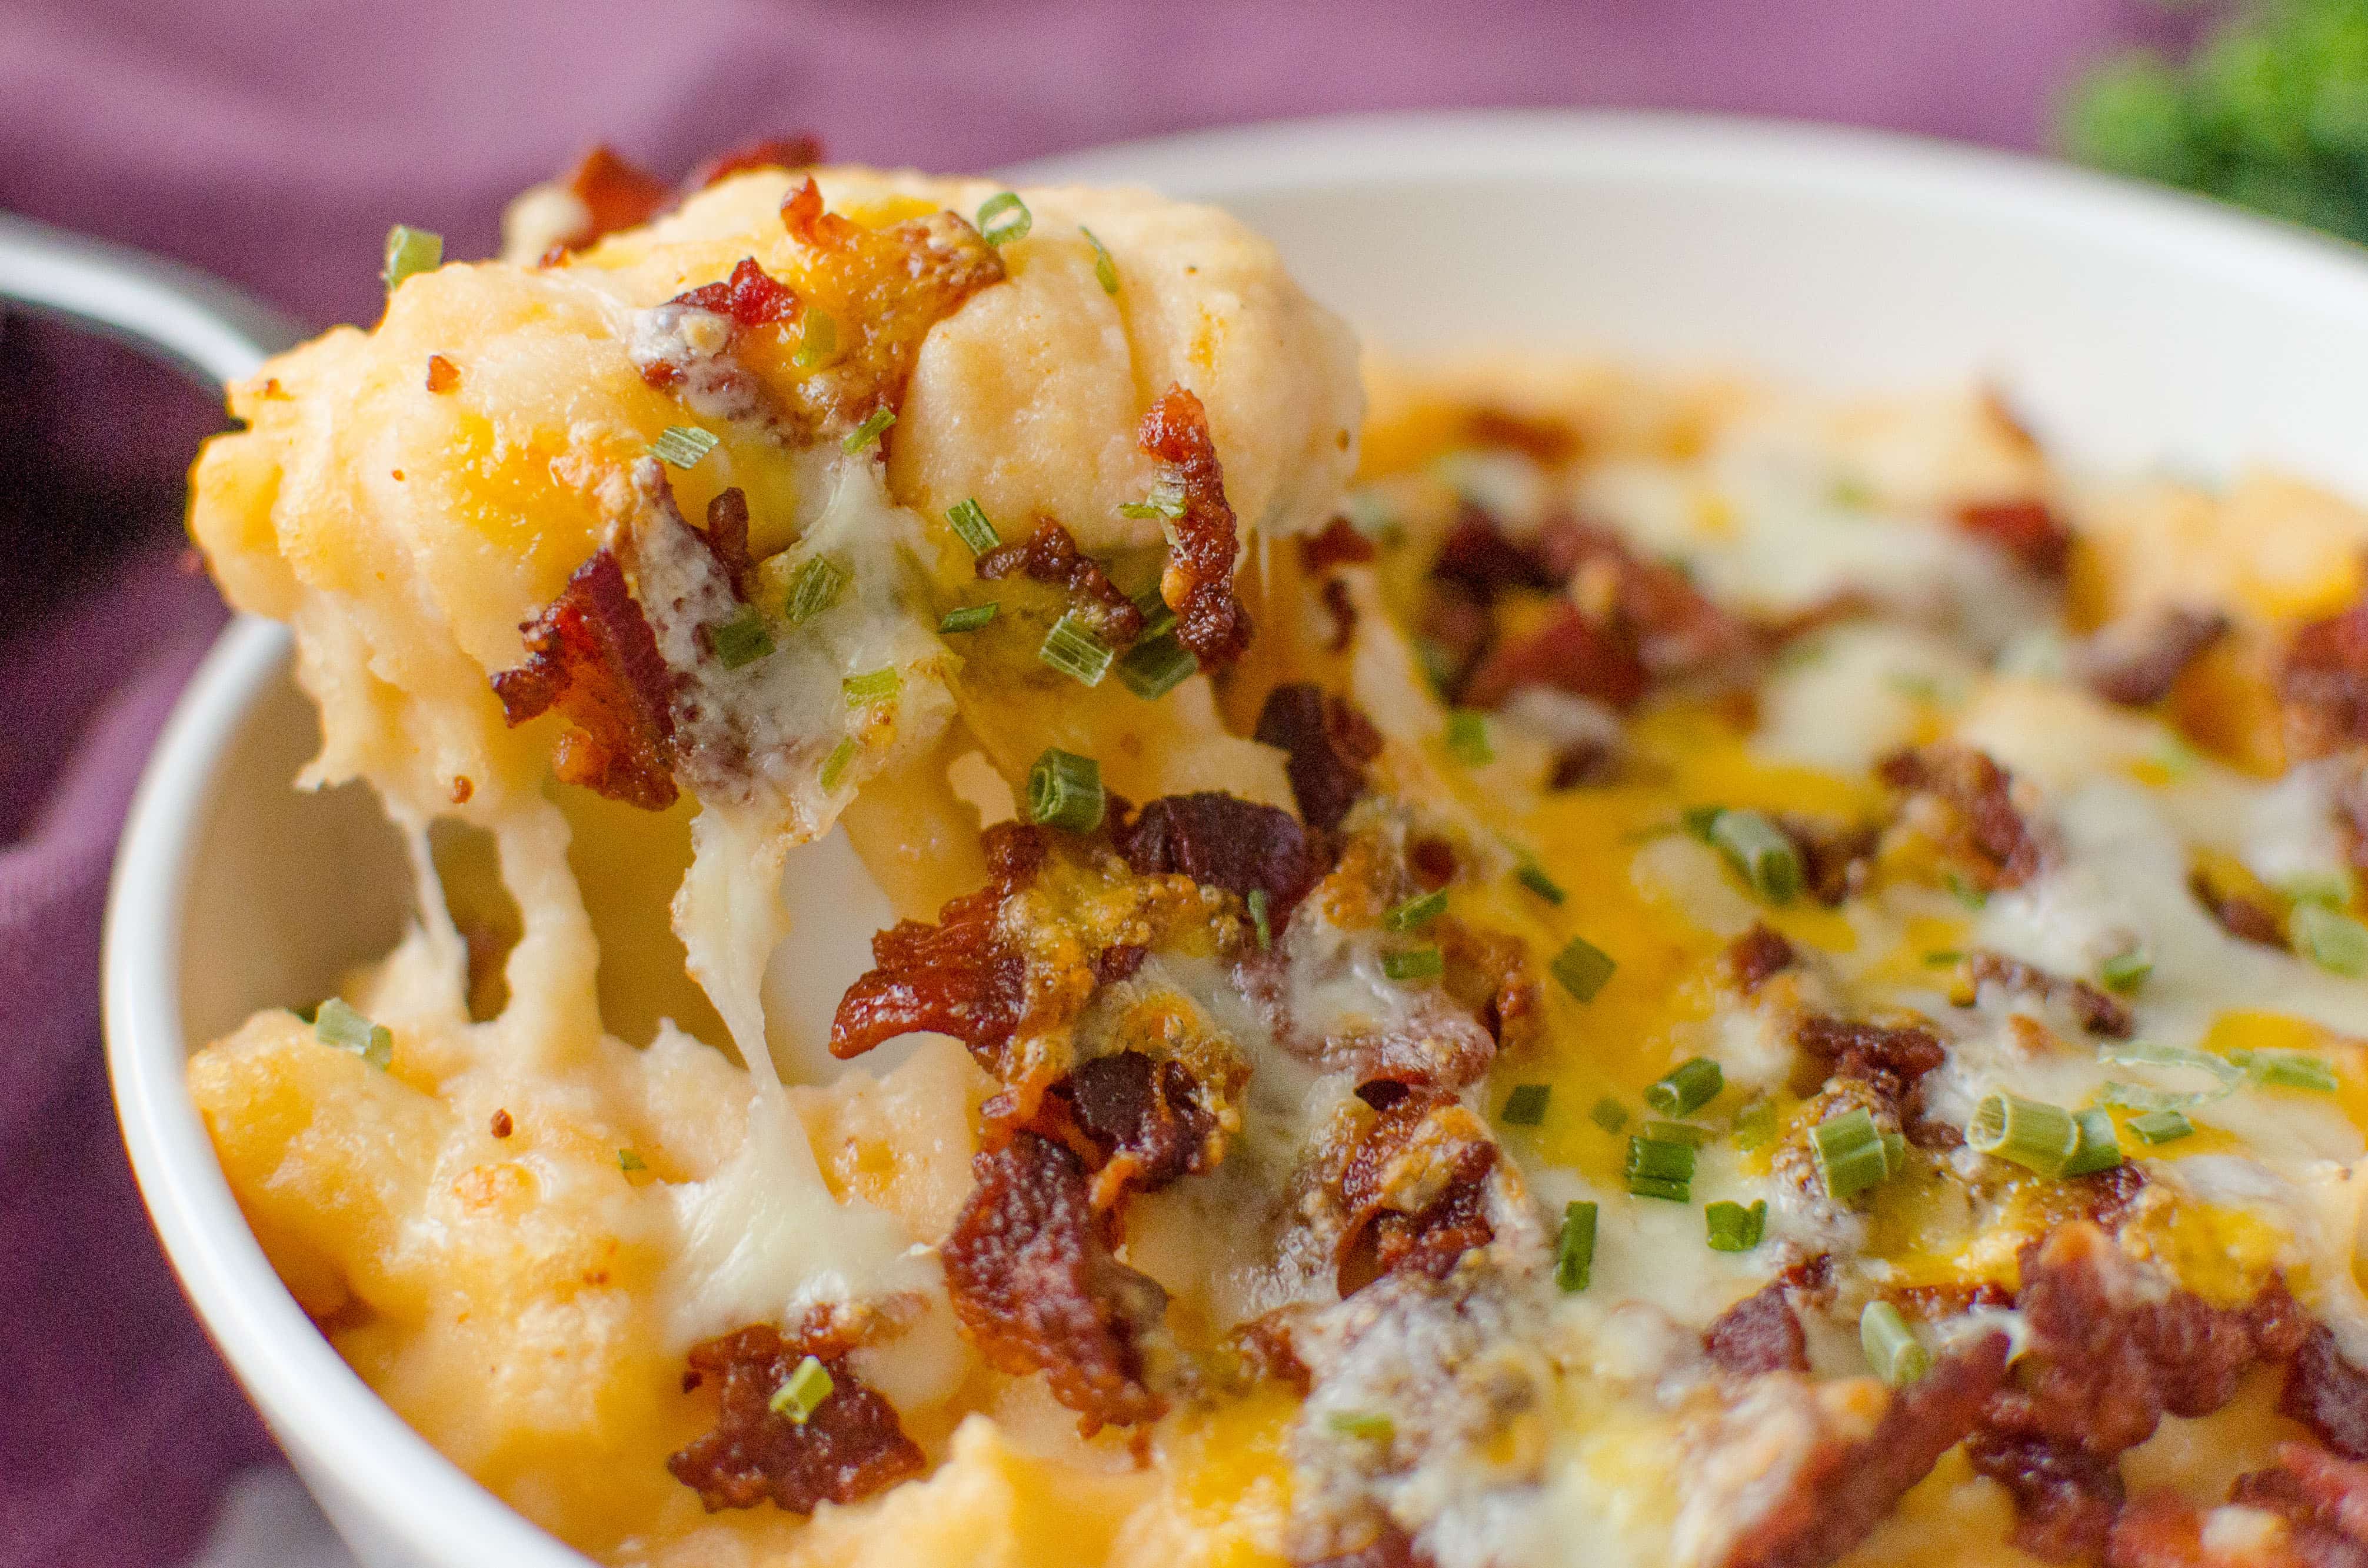 Barbecue Bacon Potato Casserole is a smokey twist on the classic twice baked potato. The creamy mashed potatoes are hit with a some barbecue sauce  to give the potatoes a whole new dimension. Bacon and cheese are broiled on the top until it reaches melty perfection